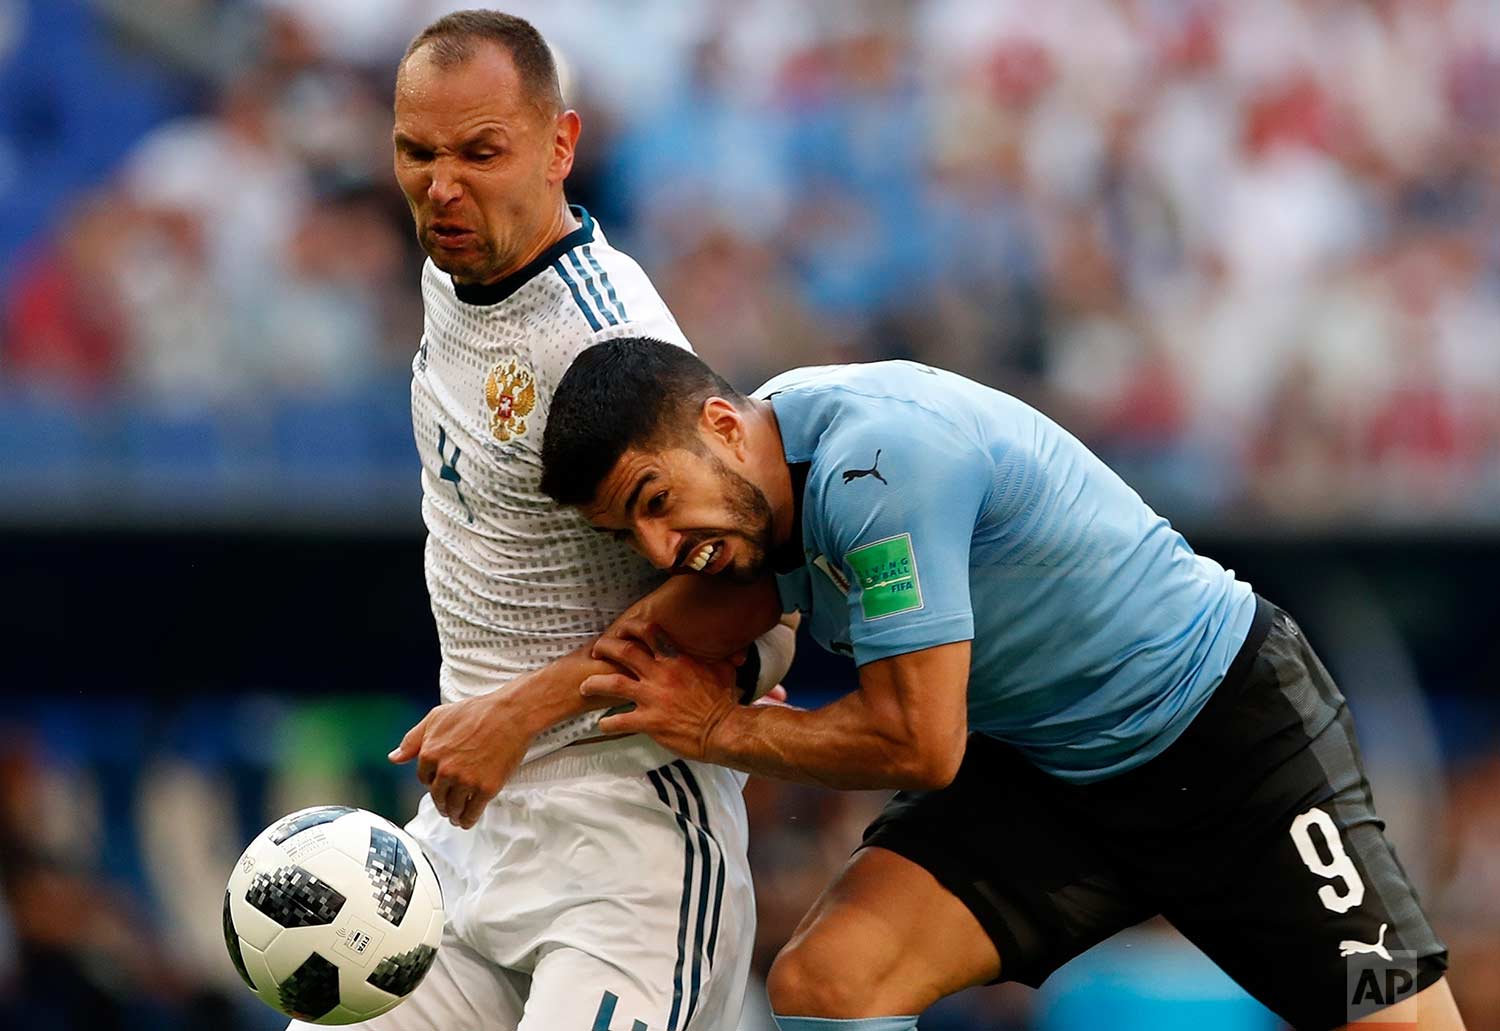  Uruguay's Luis Suarez, right, and Russia's Sergei Ignashevich fight for the ball during the group A match between Uruguay and Russia at the 2018 soccer World Cup at the Samara Arena in Samara, Russia, Monday, June 25, 2018. (AP Photo/Rebecca Blackwe